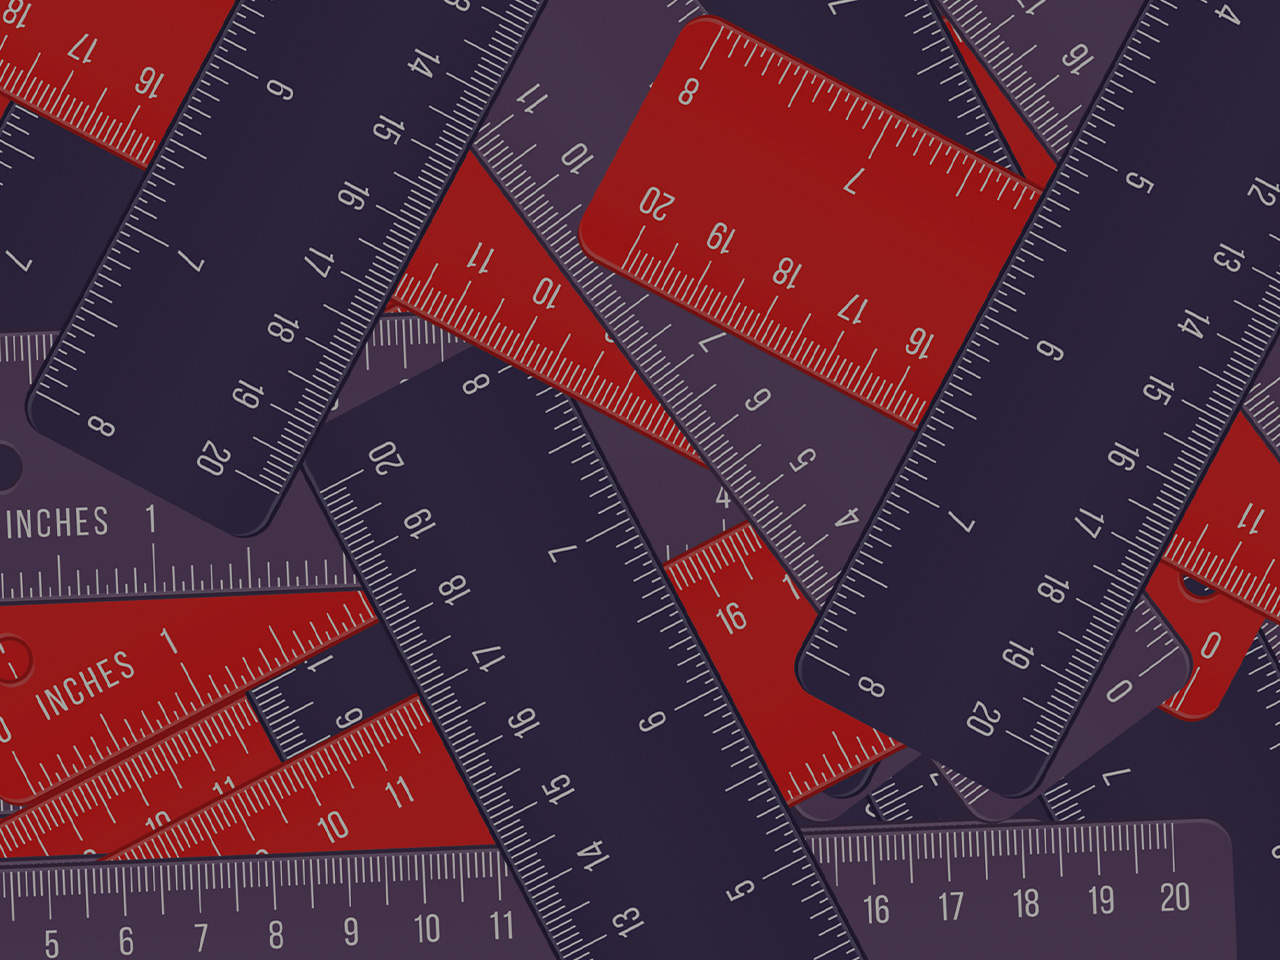 how to read fractions on a ruler